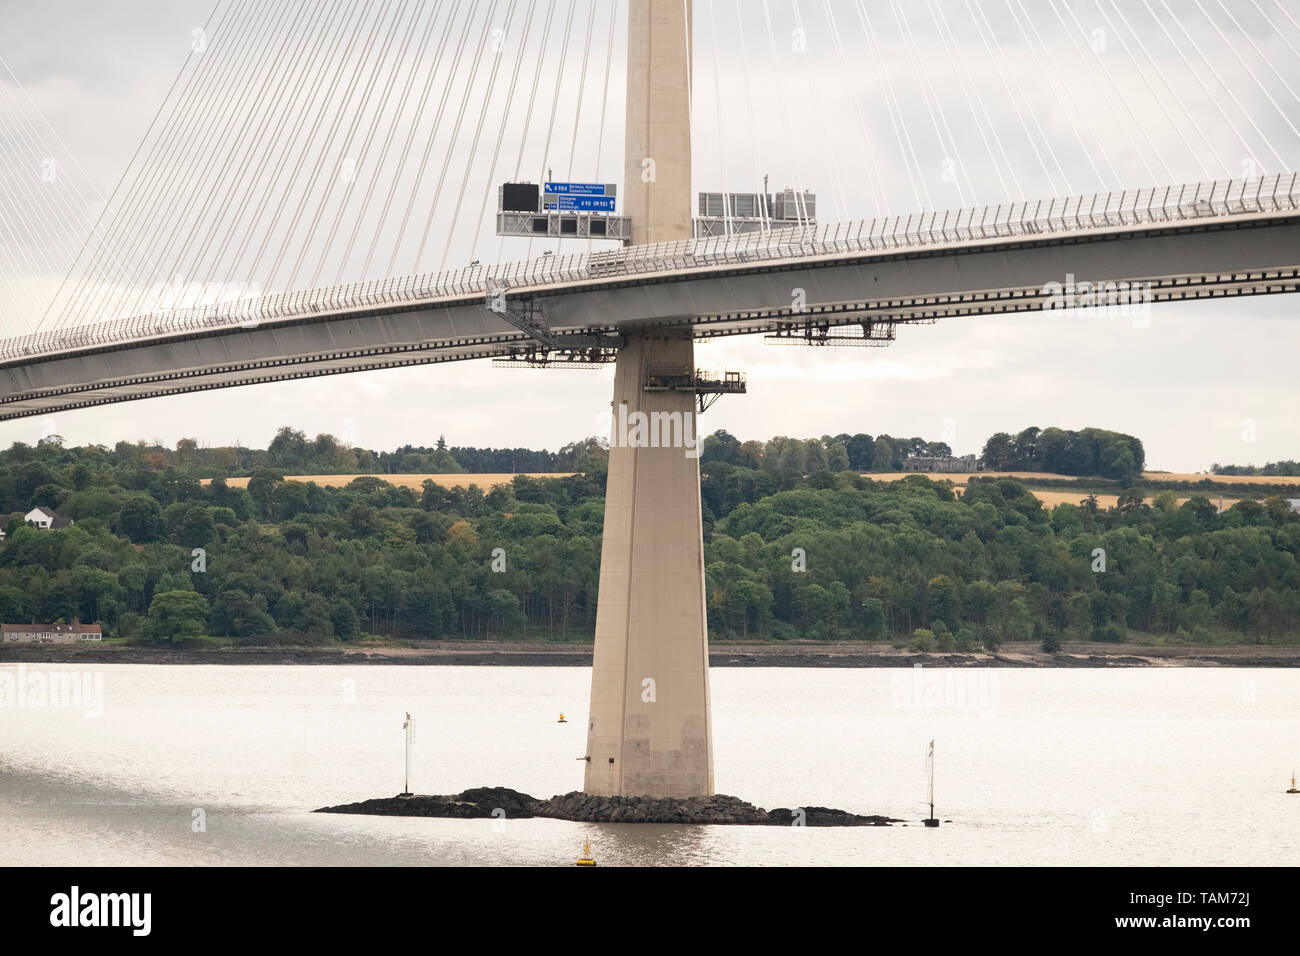 Detail of new Queensferry Crossing road bridge  near Edinburgh,Scotland, UK, showing support pillar and road signs Stock Photo